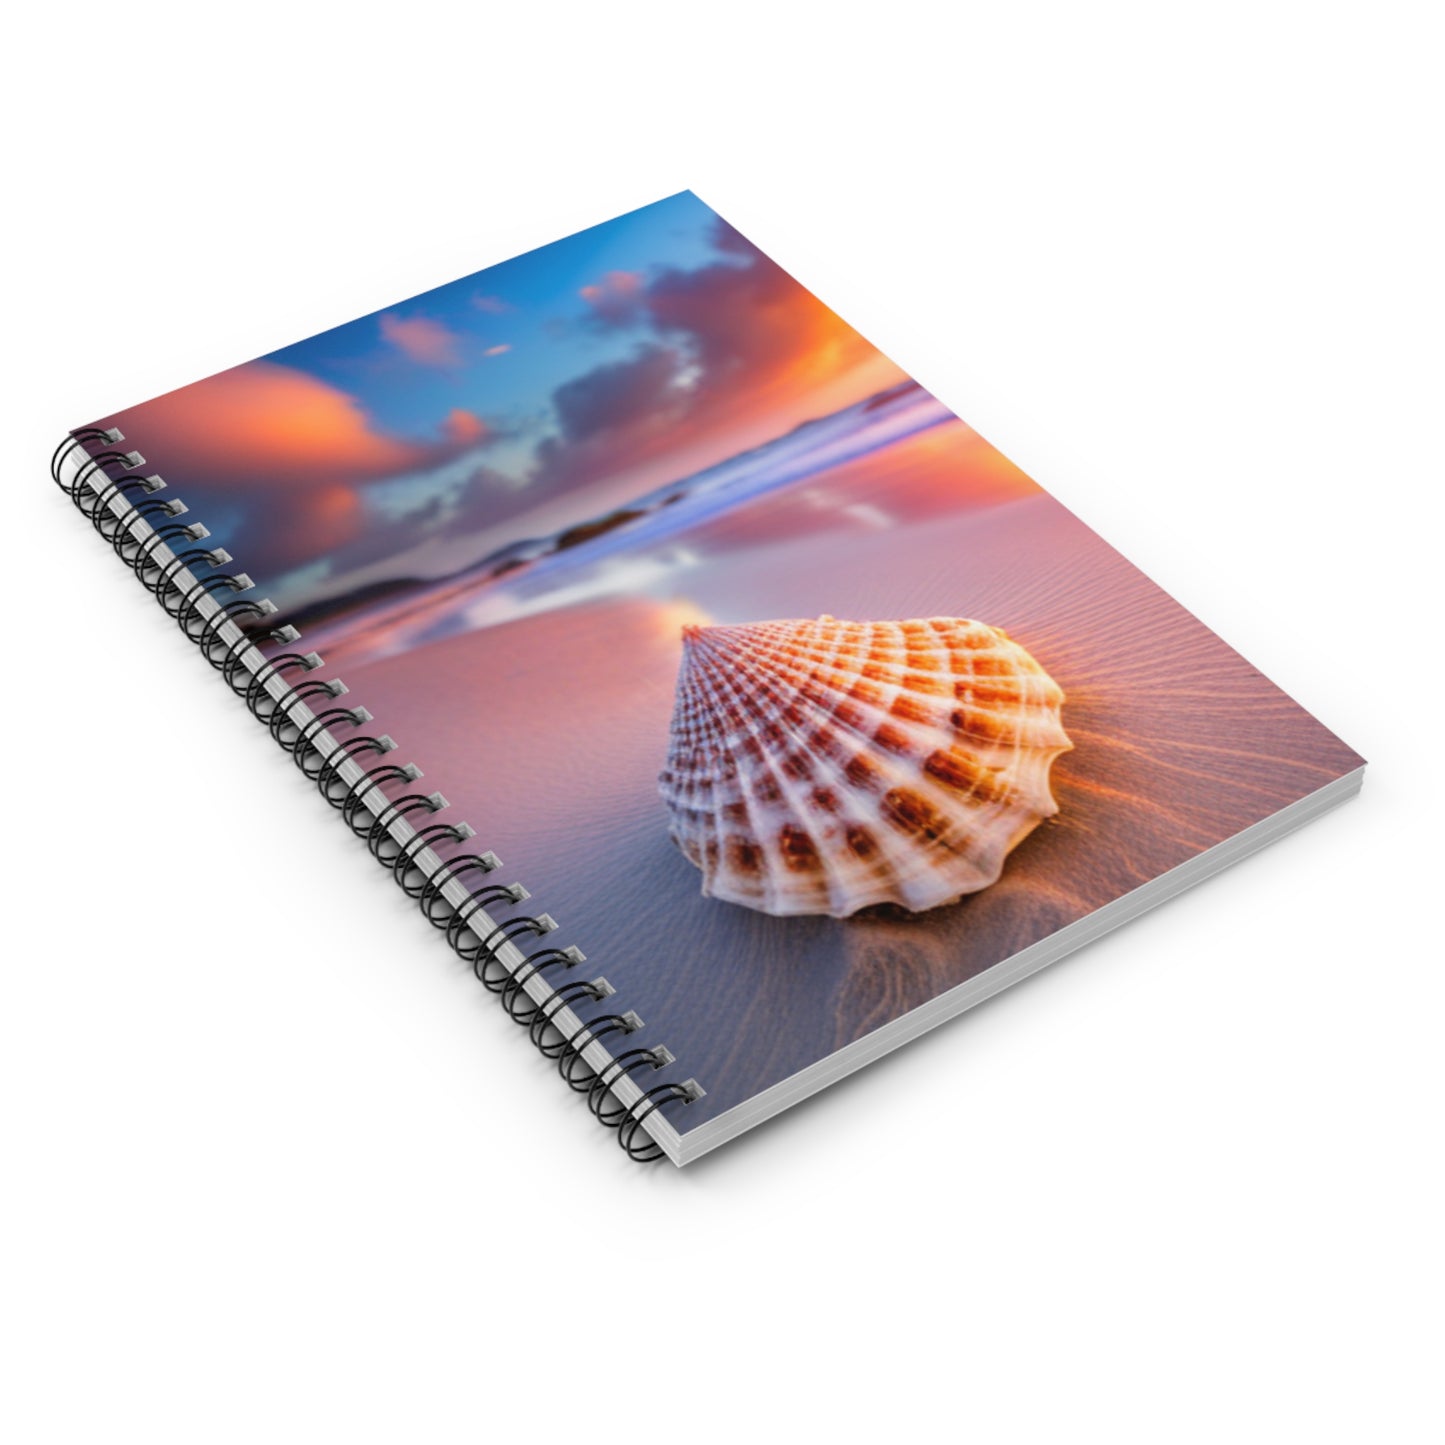 Seashell on the Beach Spiral Notebook - Ruled Line, Perfect for Journaling, Notes, Work or School